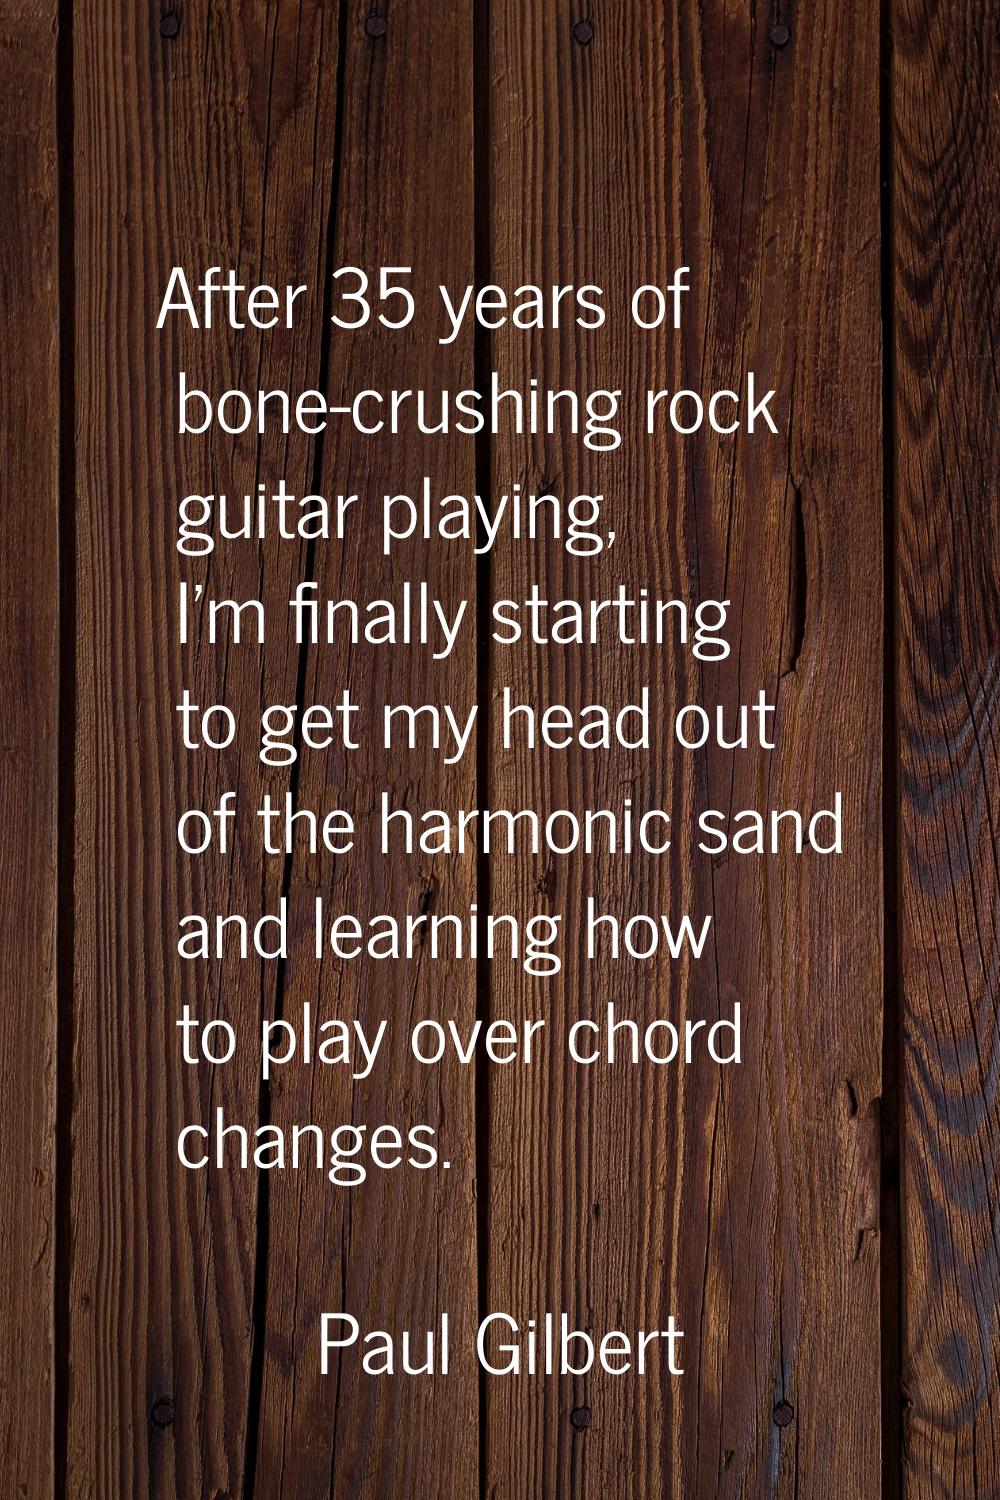 After 35 years of bone-crushing rock guitar playing, I'm finally starting to get my head out of the